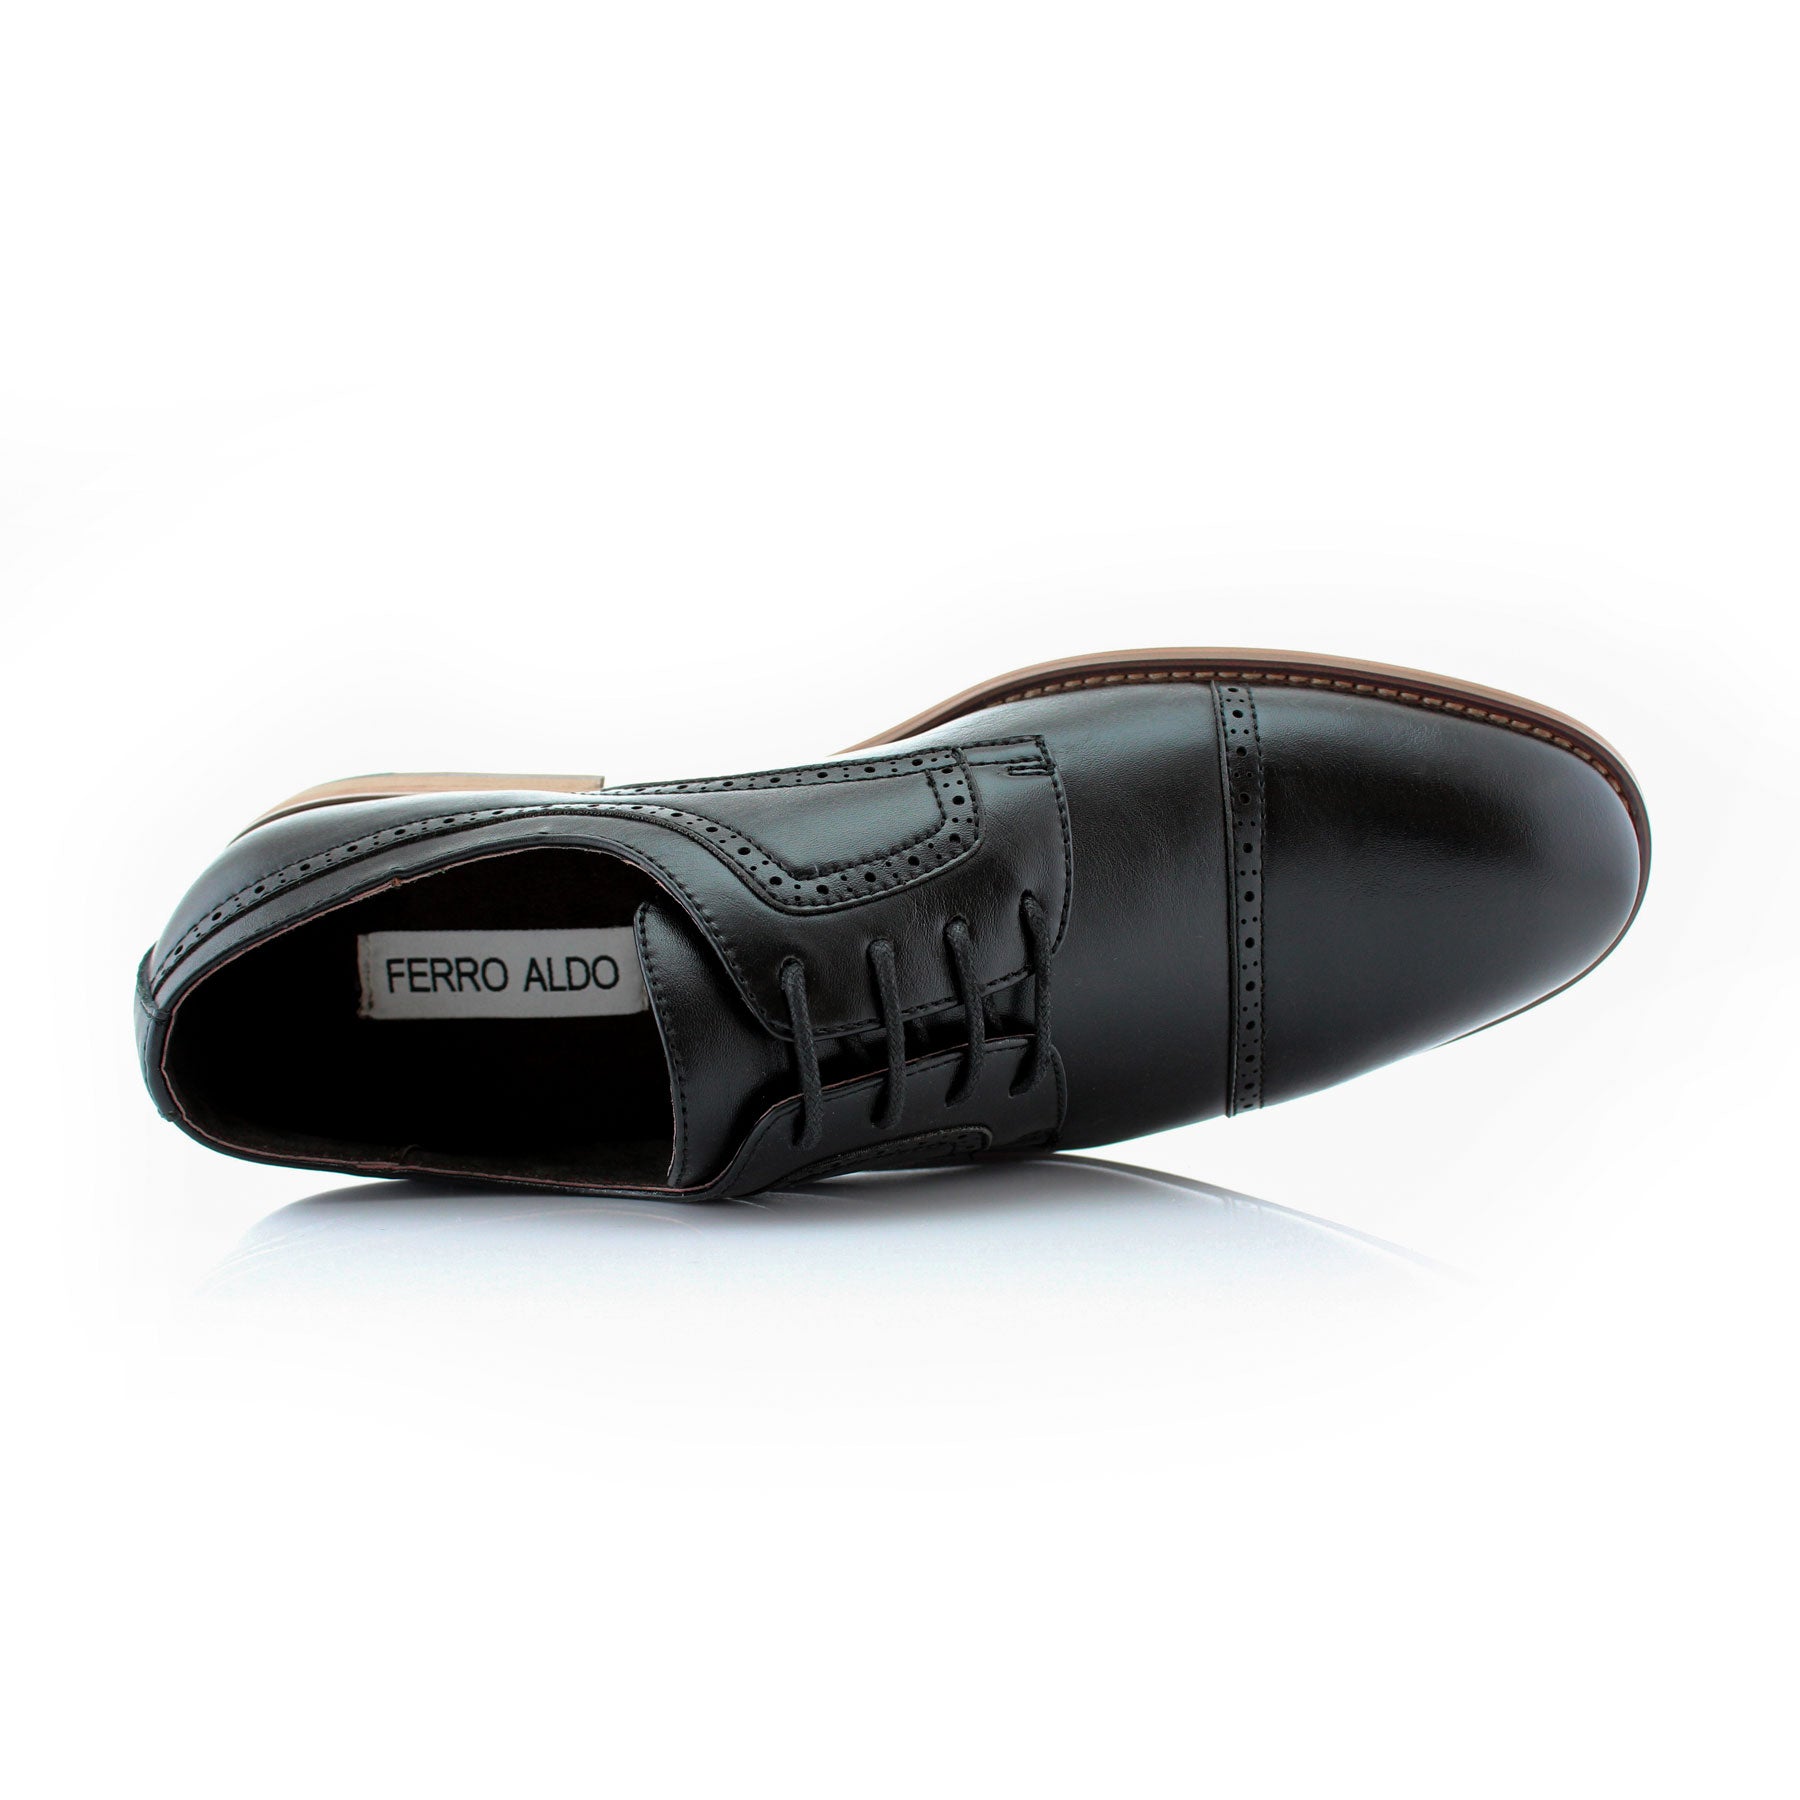 Brogue Burnished Derby Shoes | Jared by Ferro Aldo | Conal Footwear | Top-Down Angle View